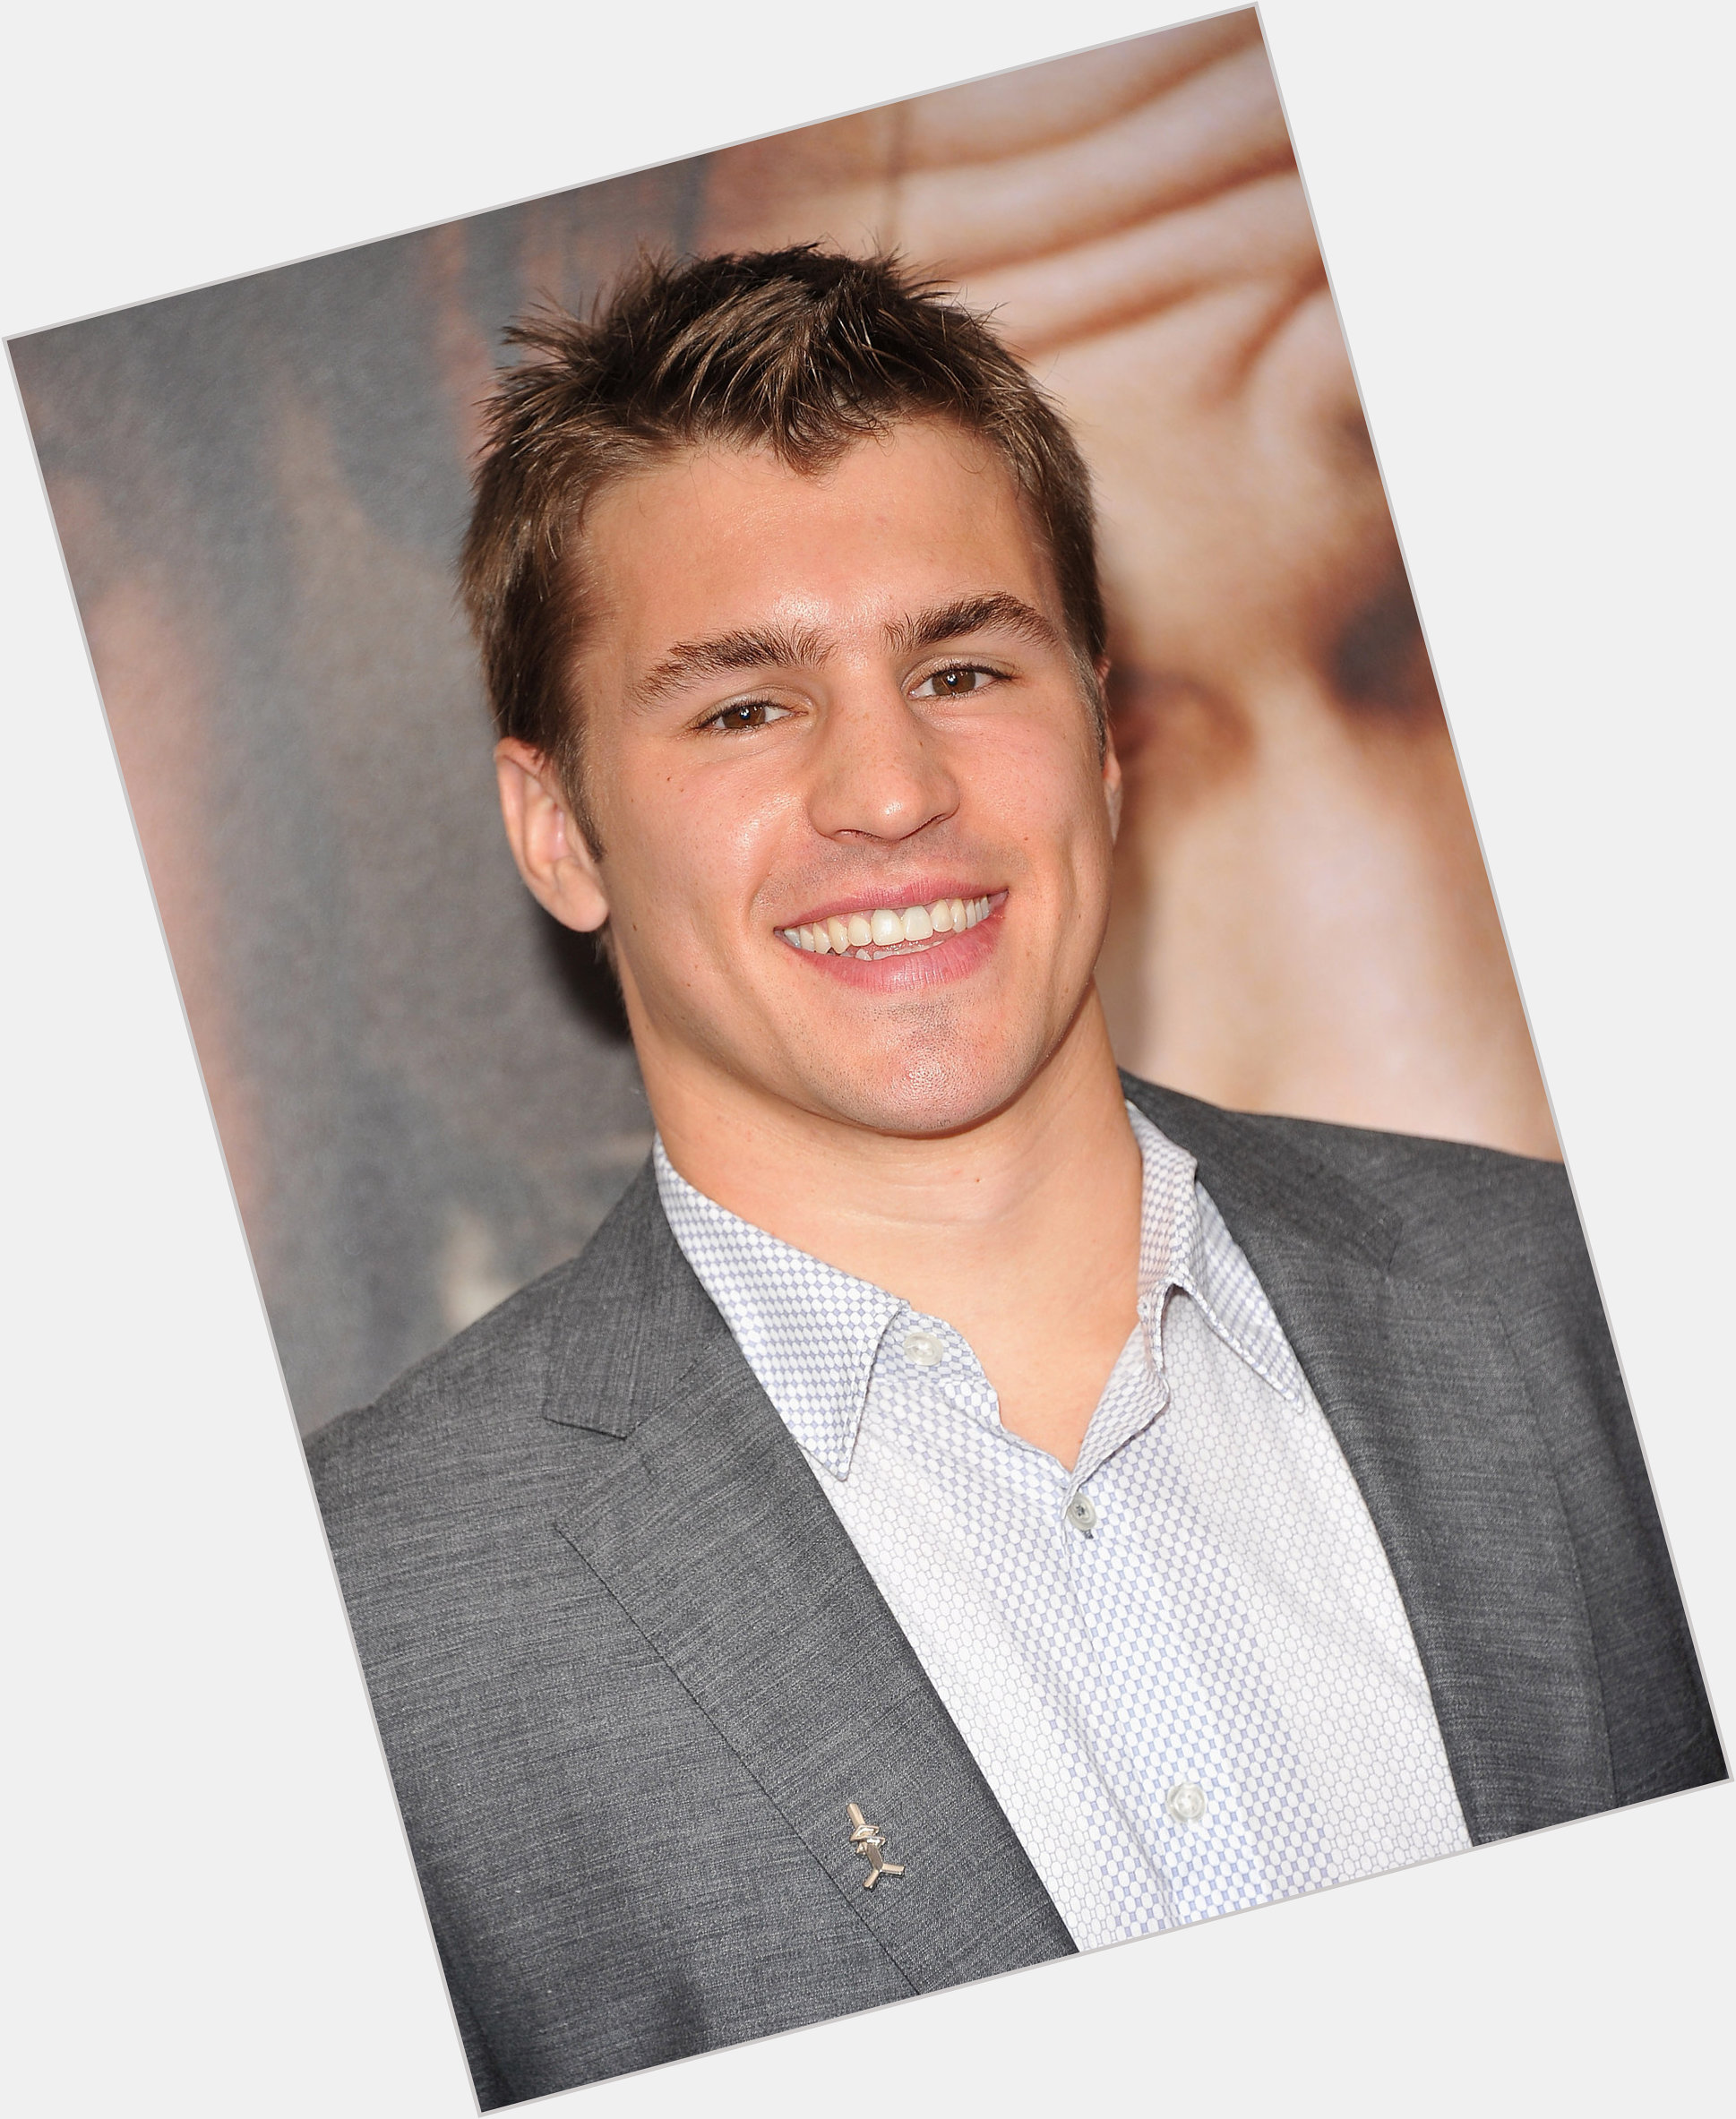 <a href="/hot-men/zach-parise/is-he-married-having-twins-injury-playing-tonight">Zach Parise</a> Athletic body,  dark brown hair & hairstyles